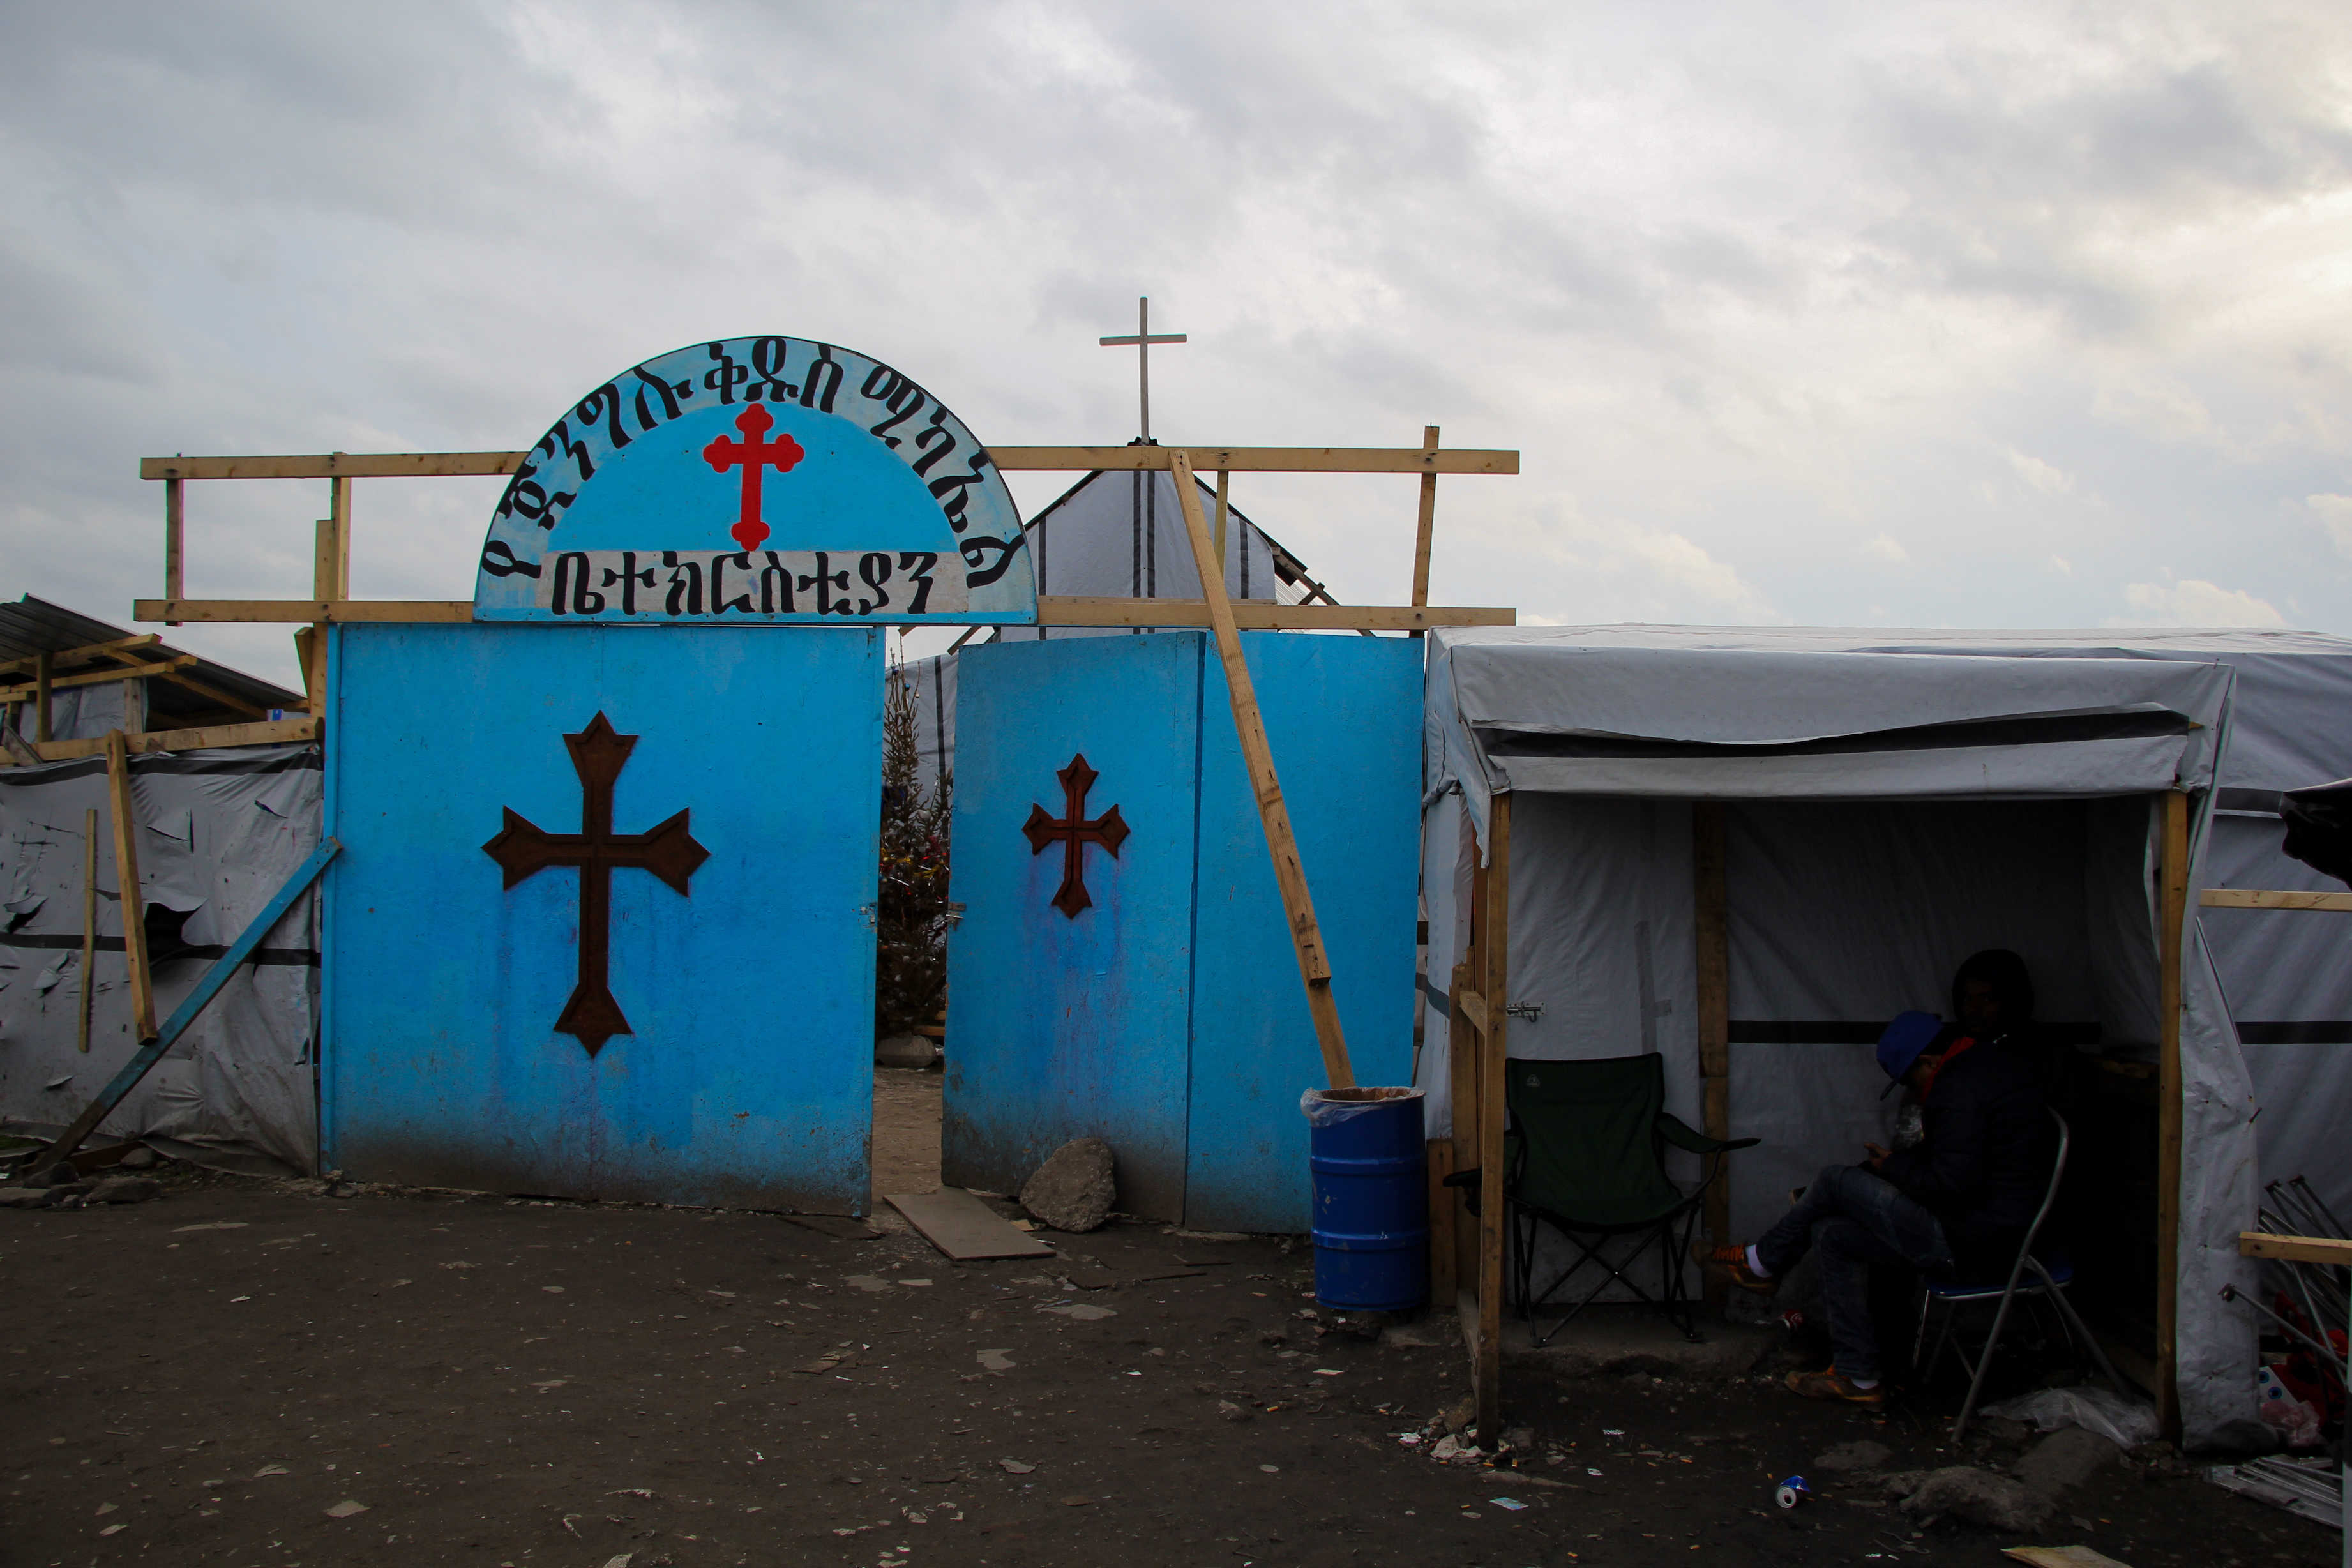 A makeshift Church stands in contrast to the many tents and tarp structures scattered throughout the refugee settlement. Structures such as these served as symbols of migrants' continued resilience and dedication to community and culture.